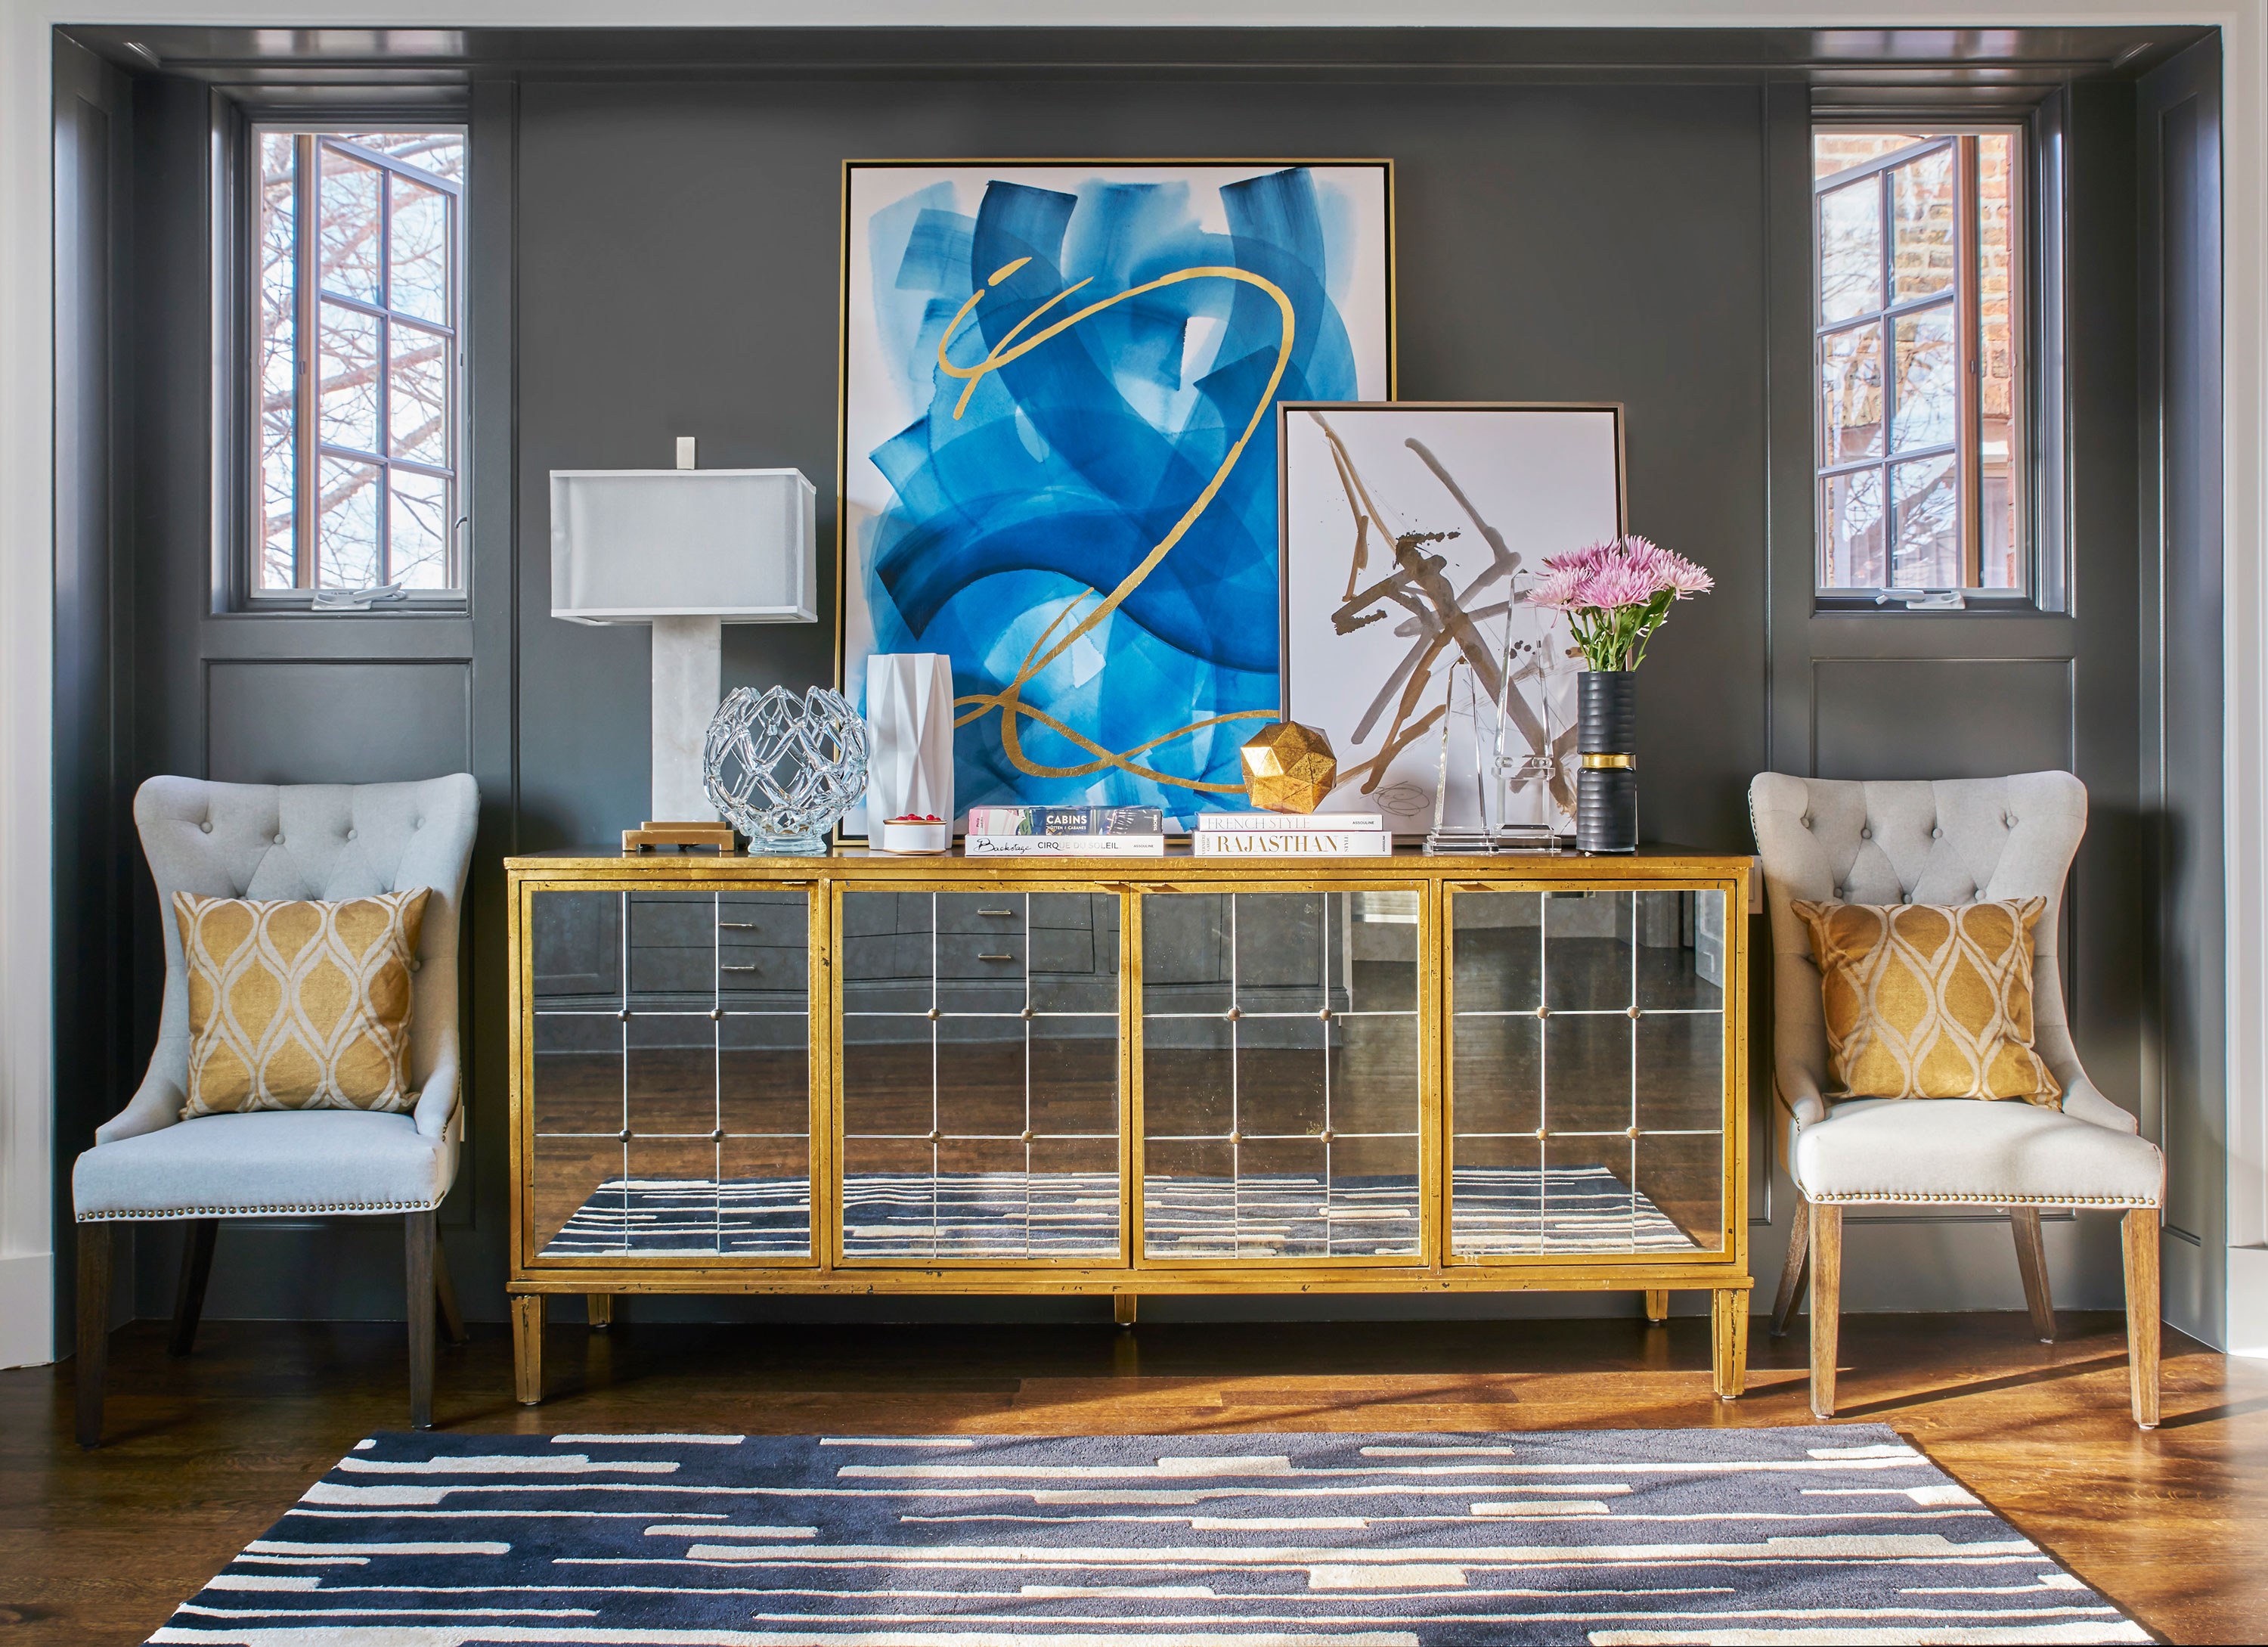 “In a dark space, try integrating reflective furniture and accessories. Next, mix in light colored art, upholstery pieces, and rugs. Everything will feel light, bright, and more spacious.”